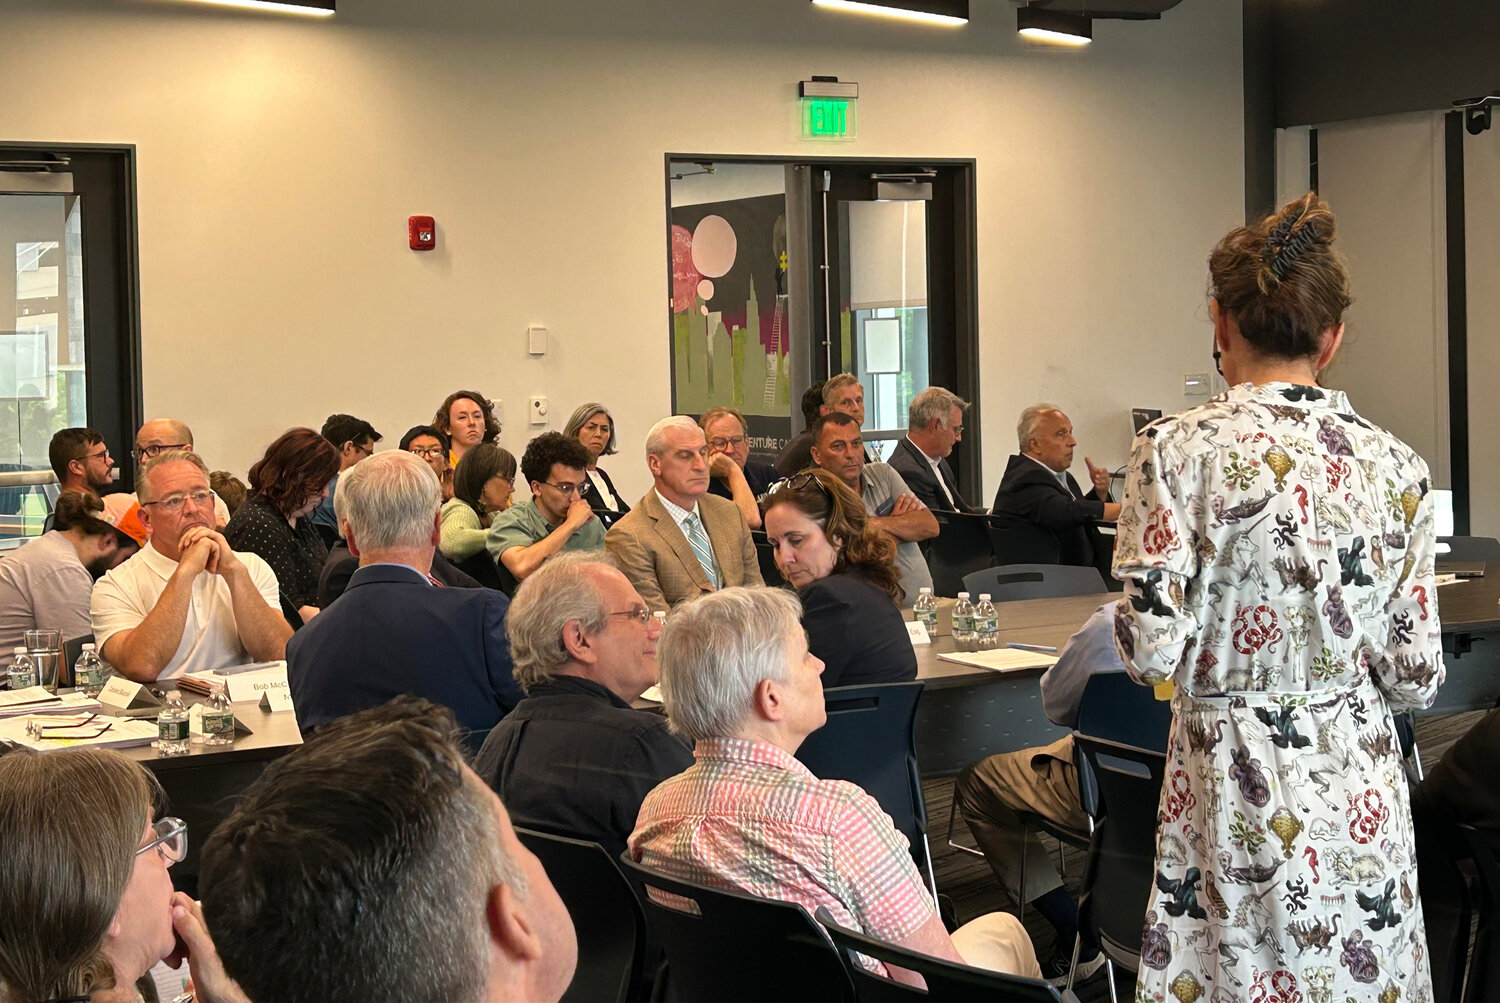 Lily Bogosian, interim president of FPNA, spoke at a July meeting of the 195 Commission to express concern about the influx of cars in the neighborhood caused by recent development